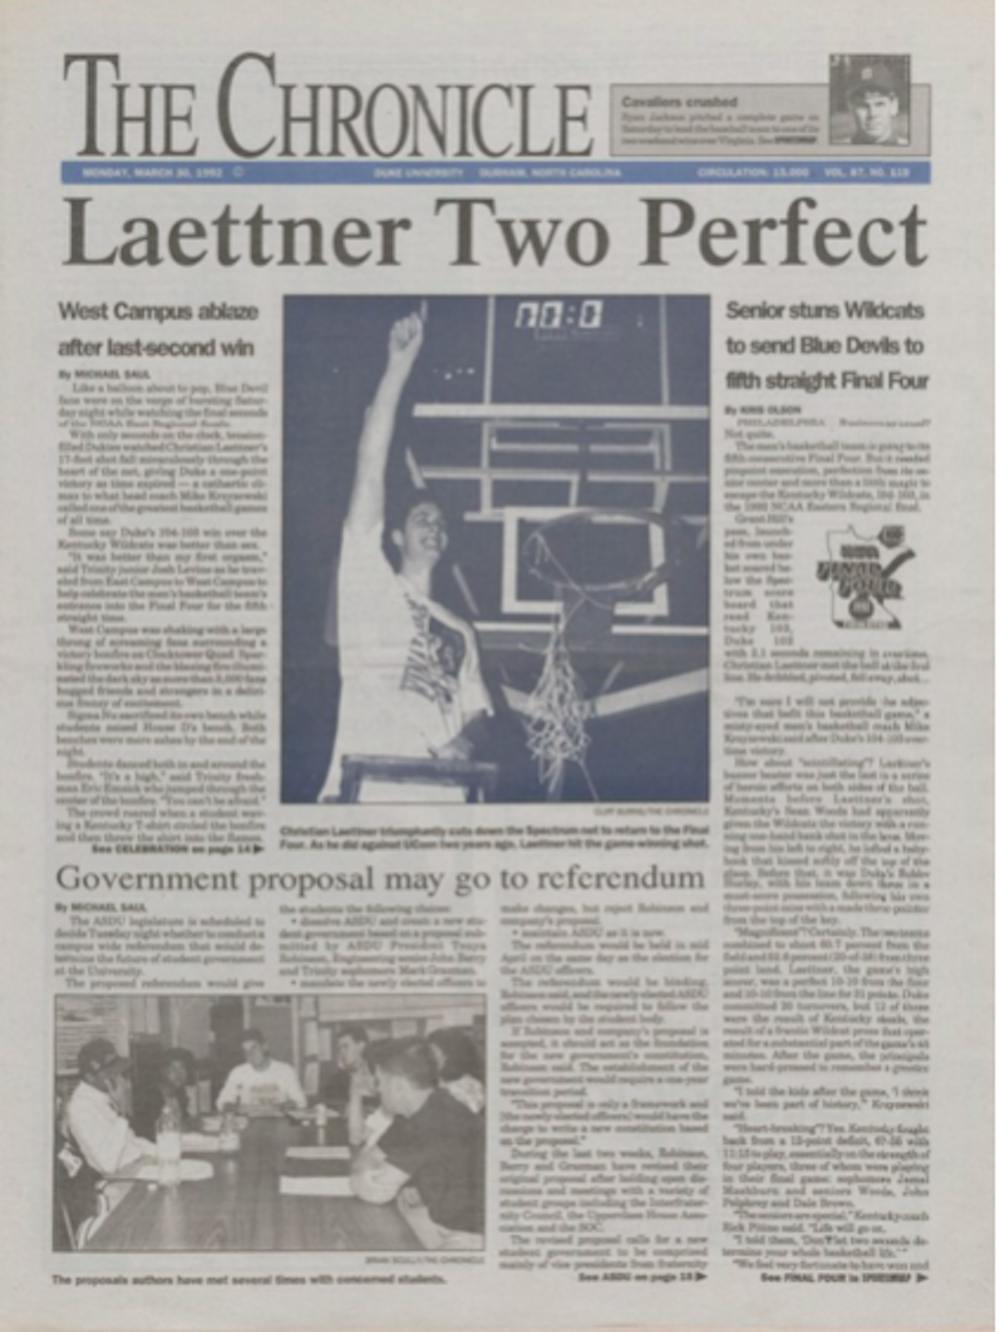 <p>"The Shot" brought the Blue Devils to their fifth straight Final Four</p>